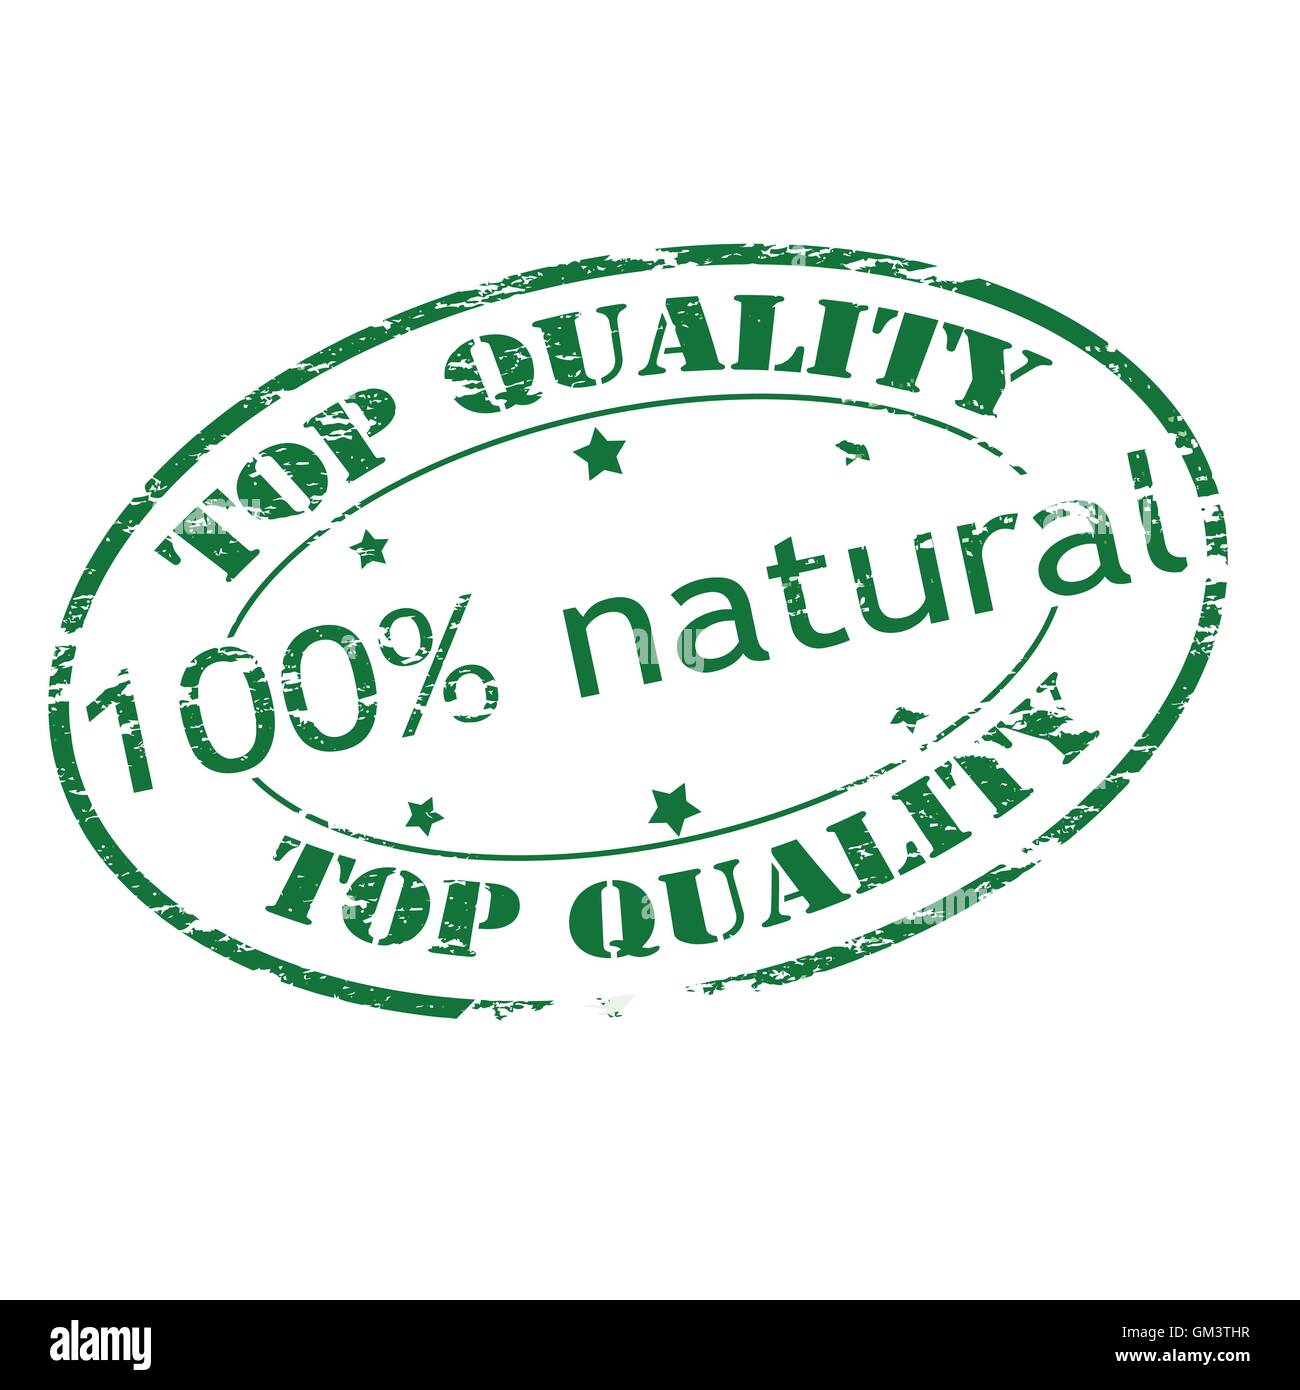 One hundred percent natural Stock Vector